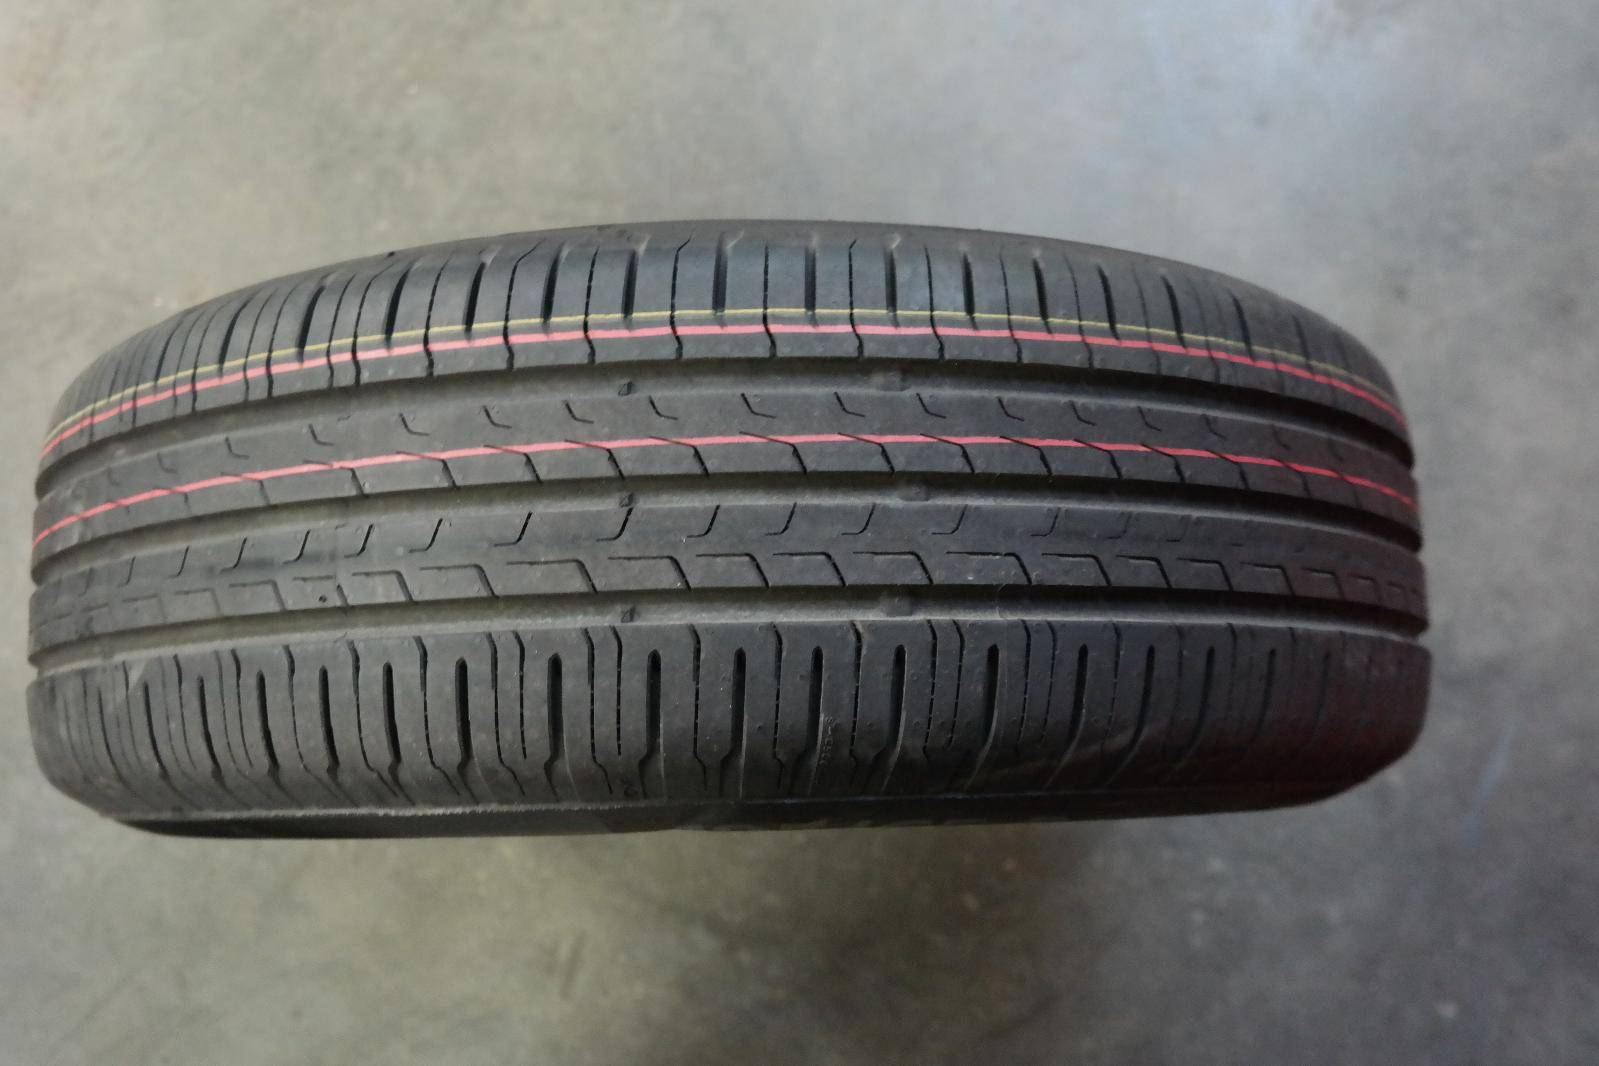 ALS NIEUW +BAND 195/65 R15 91H CONTINENTAL ECOCONTACT6 6MM +VELG FZY ZWART CATAFORESE 9832762477 98327624ZY